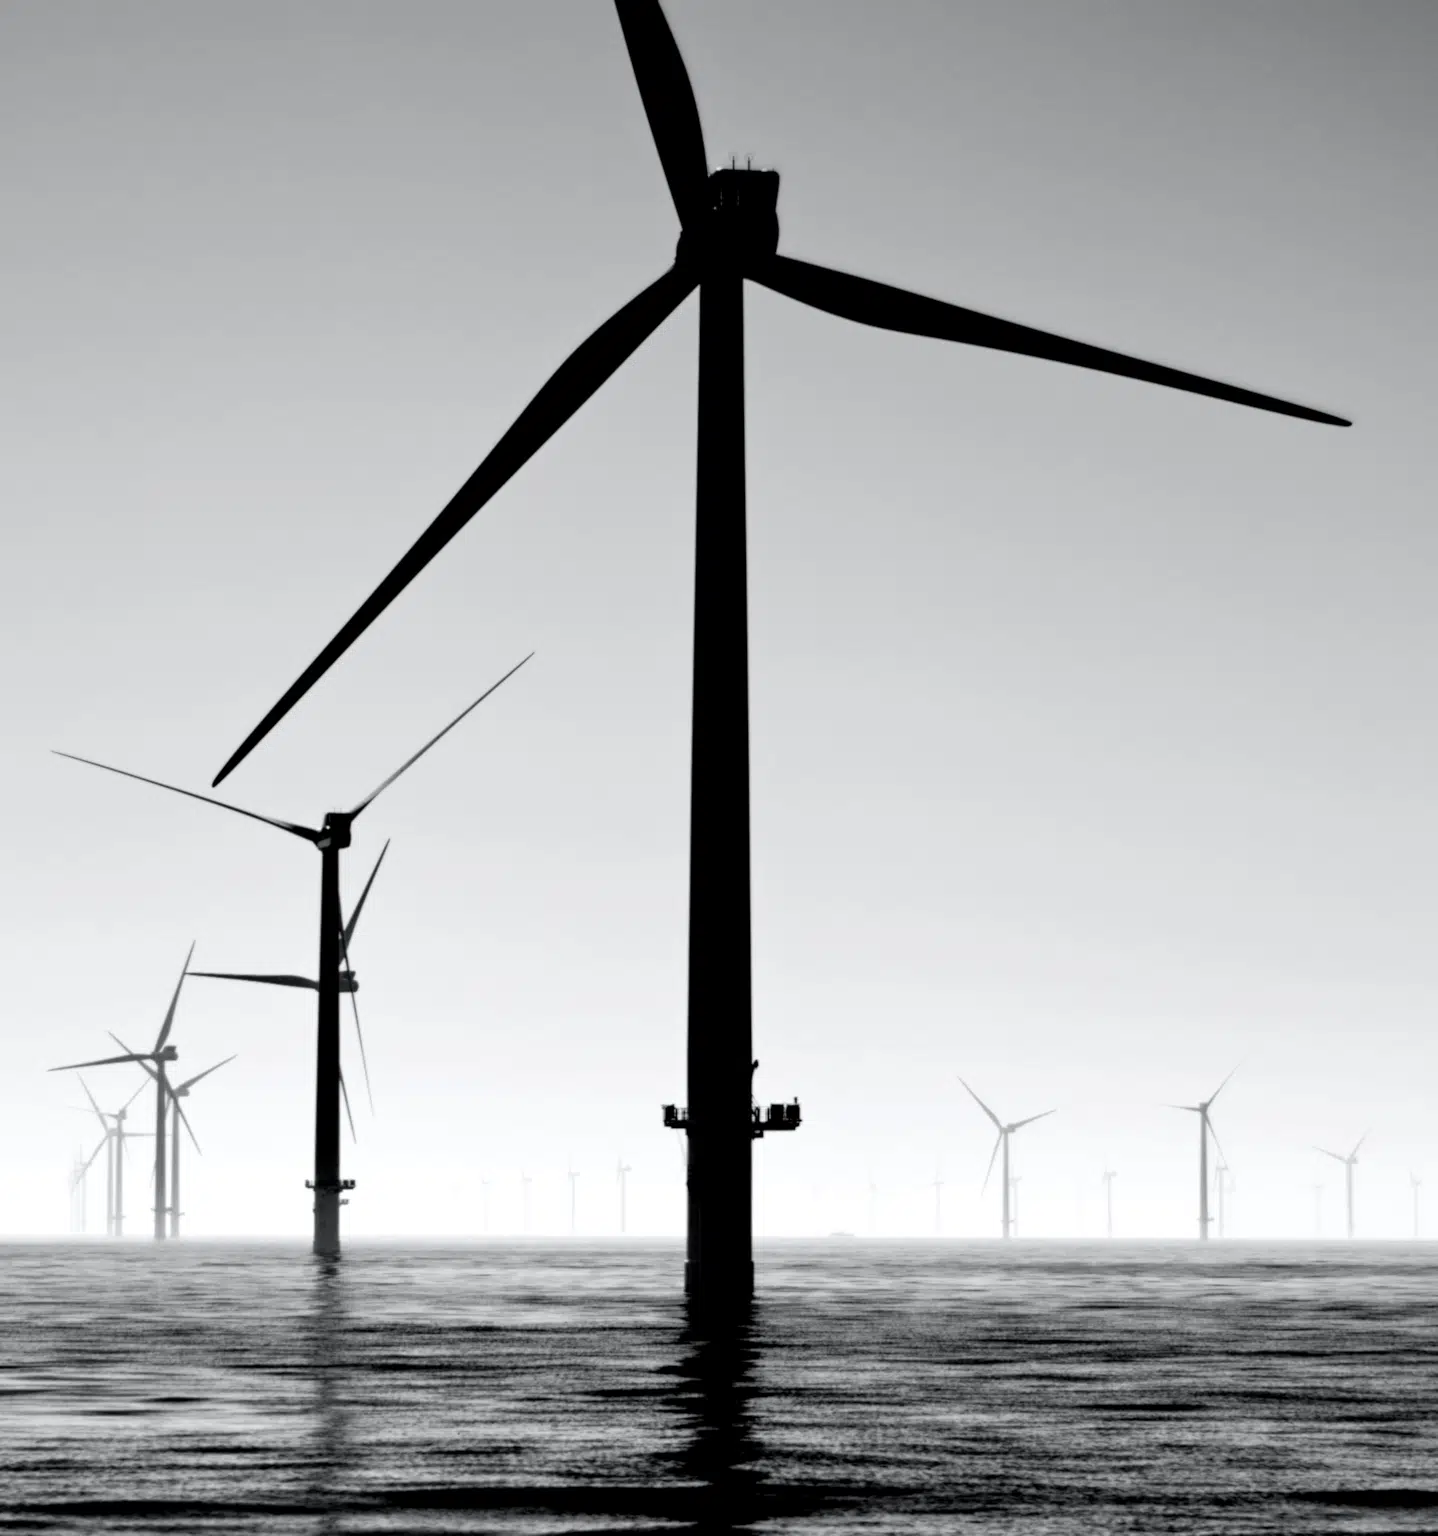 Construction Begins on New York’s First Offshore Wind Project